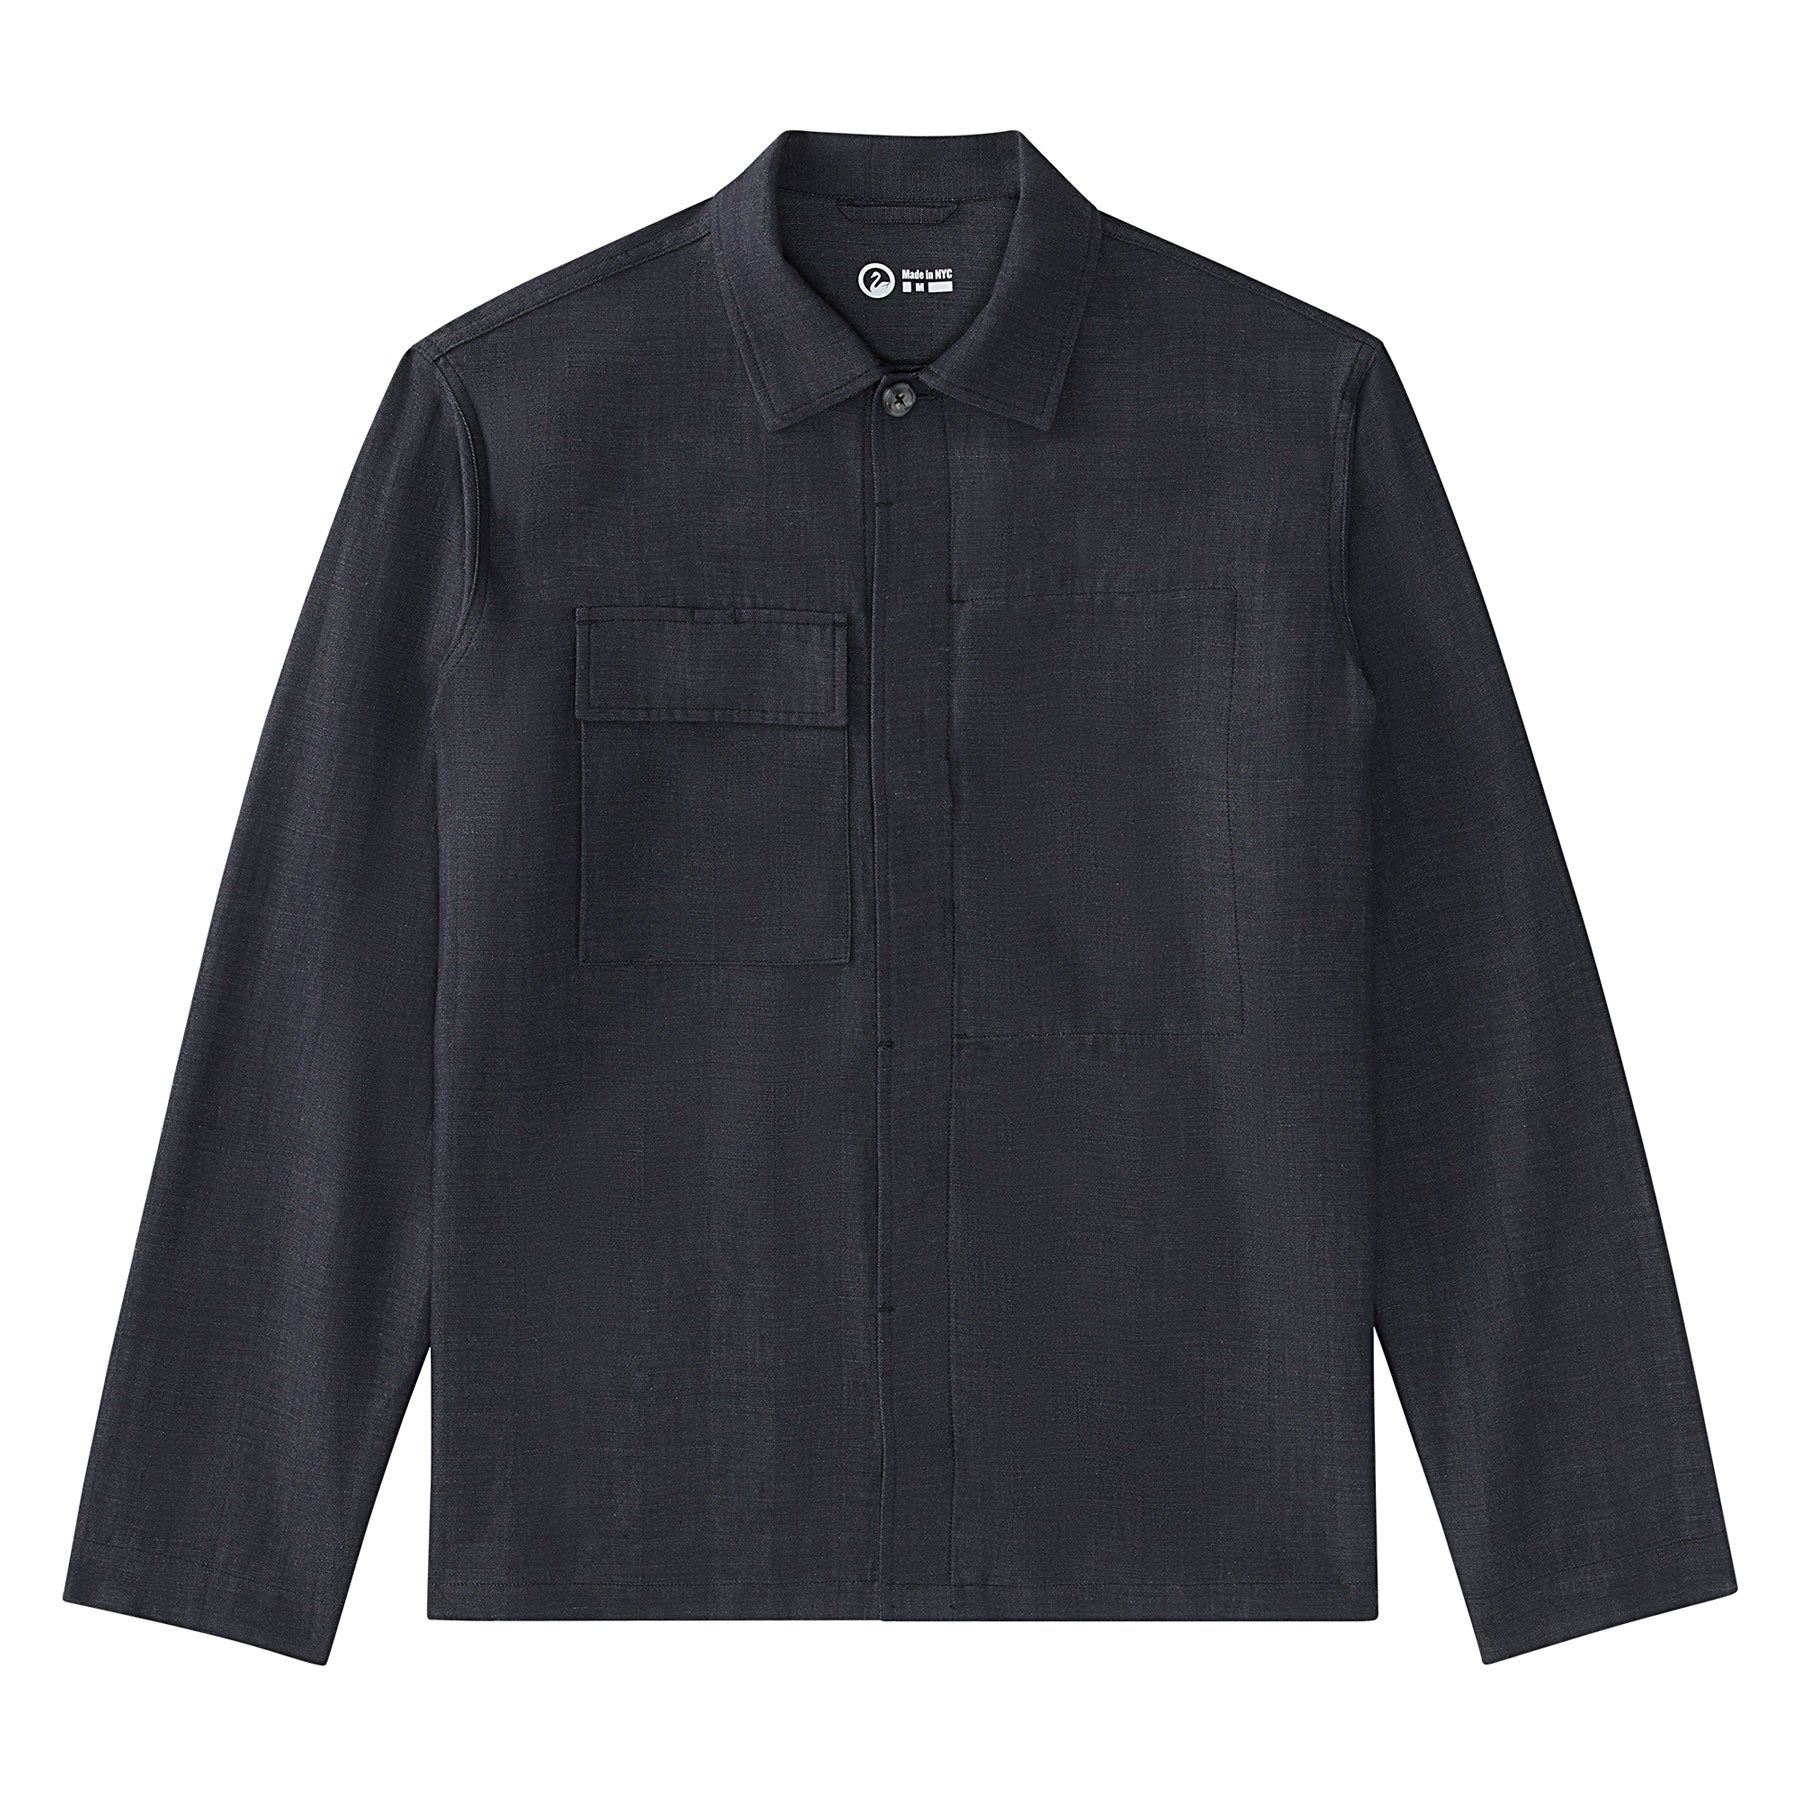 Full flat image of the Experiment 259 - Woollinen Hardshirt in Chambray Gray